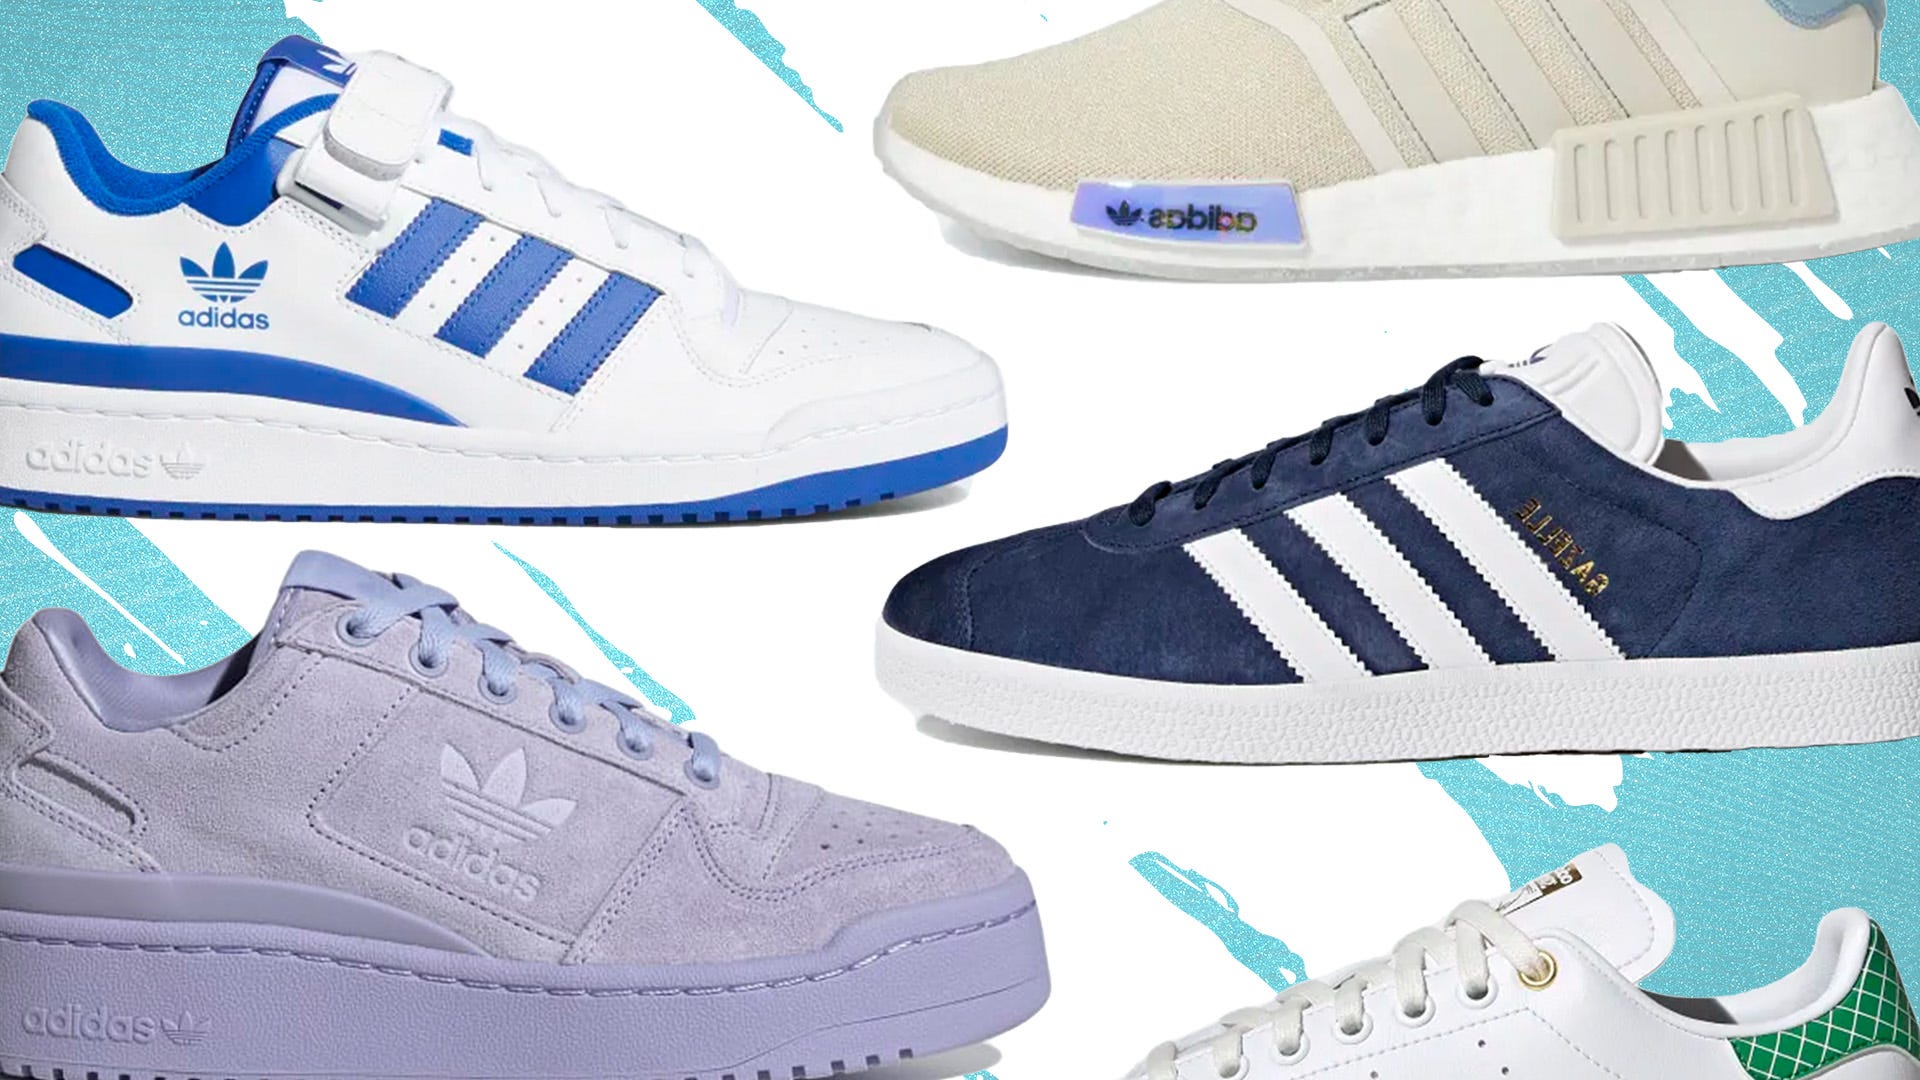 7 Most Popular Adidas Shoes and Best Selling Sneakers of All Time